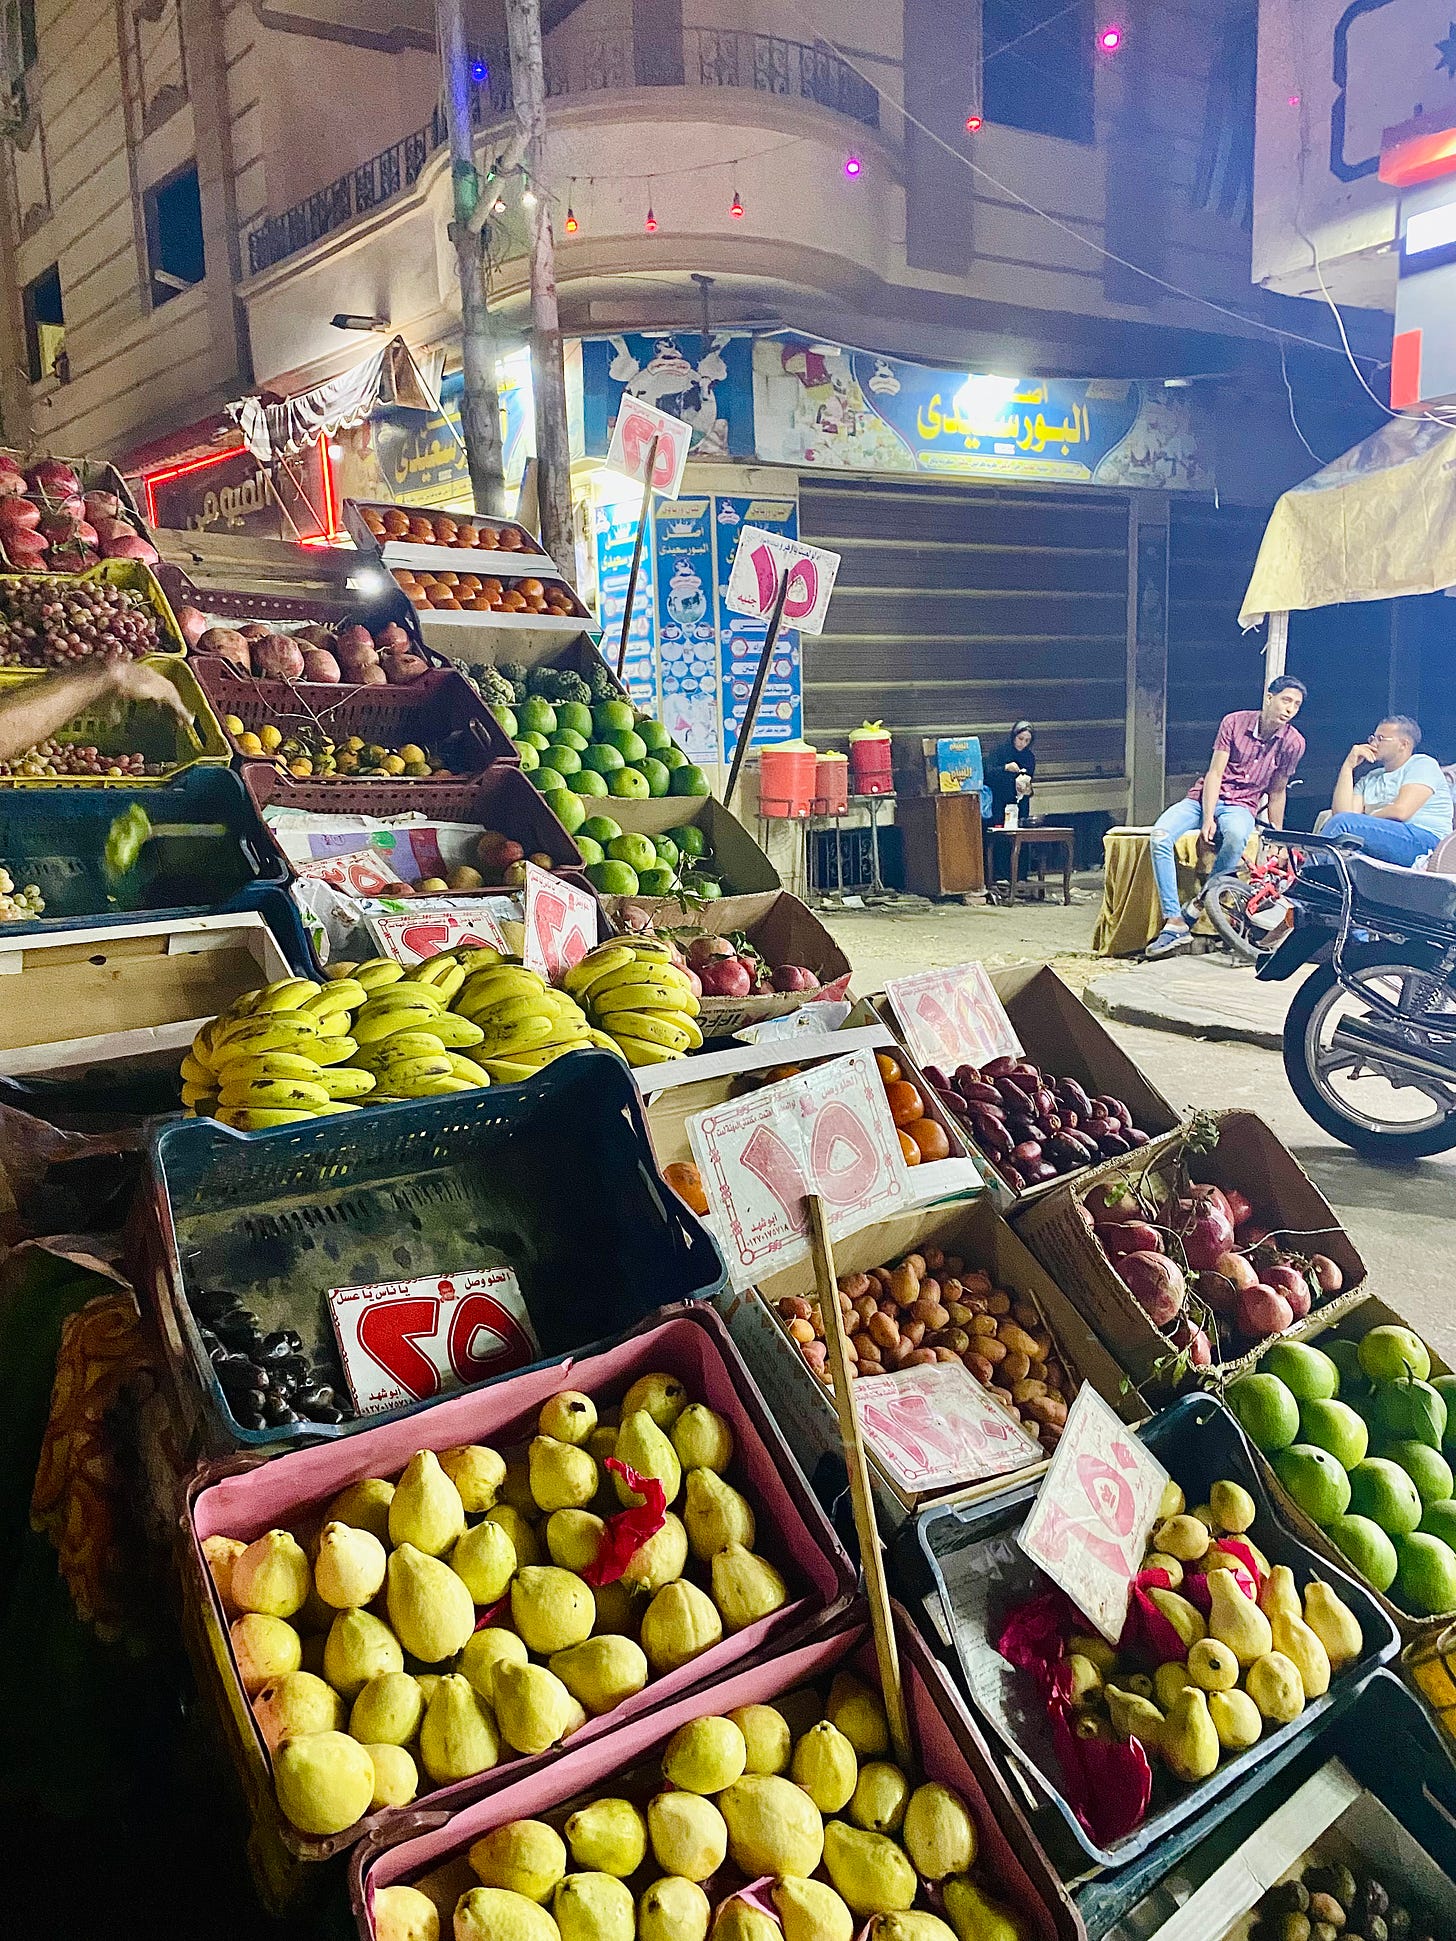 A fruit cart with guava, bananas, and dates on a city street